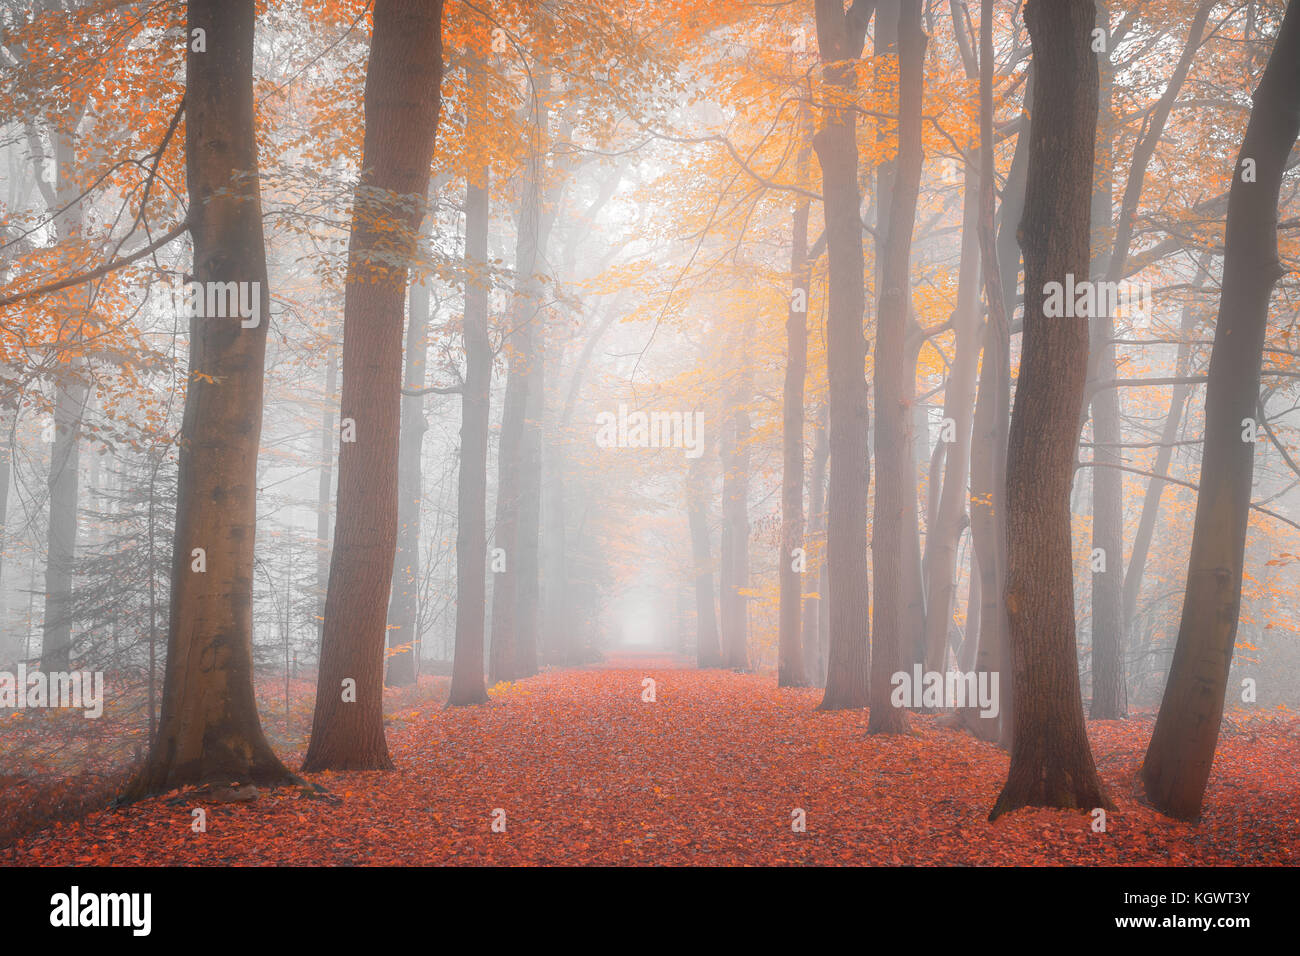 Misty wood path in Autumn with orange colors. Stock Photo